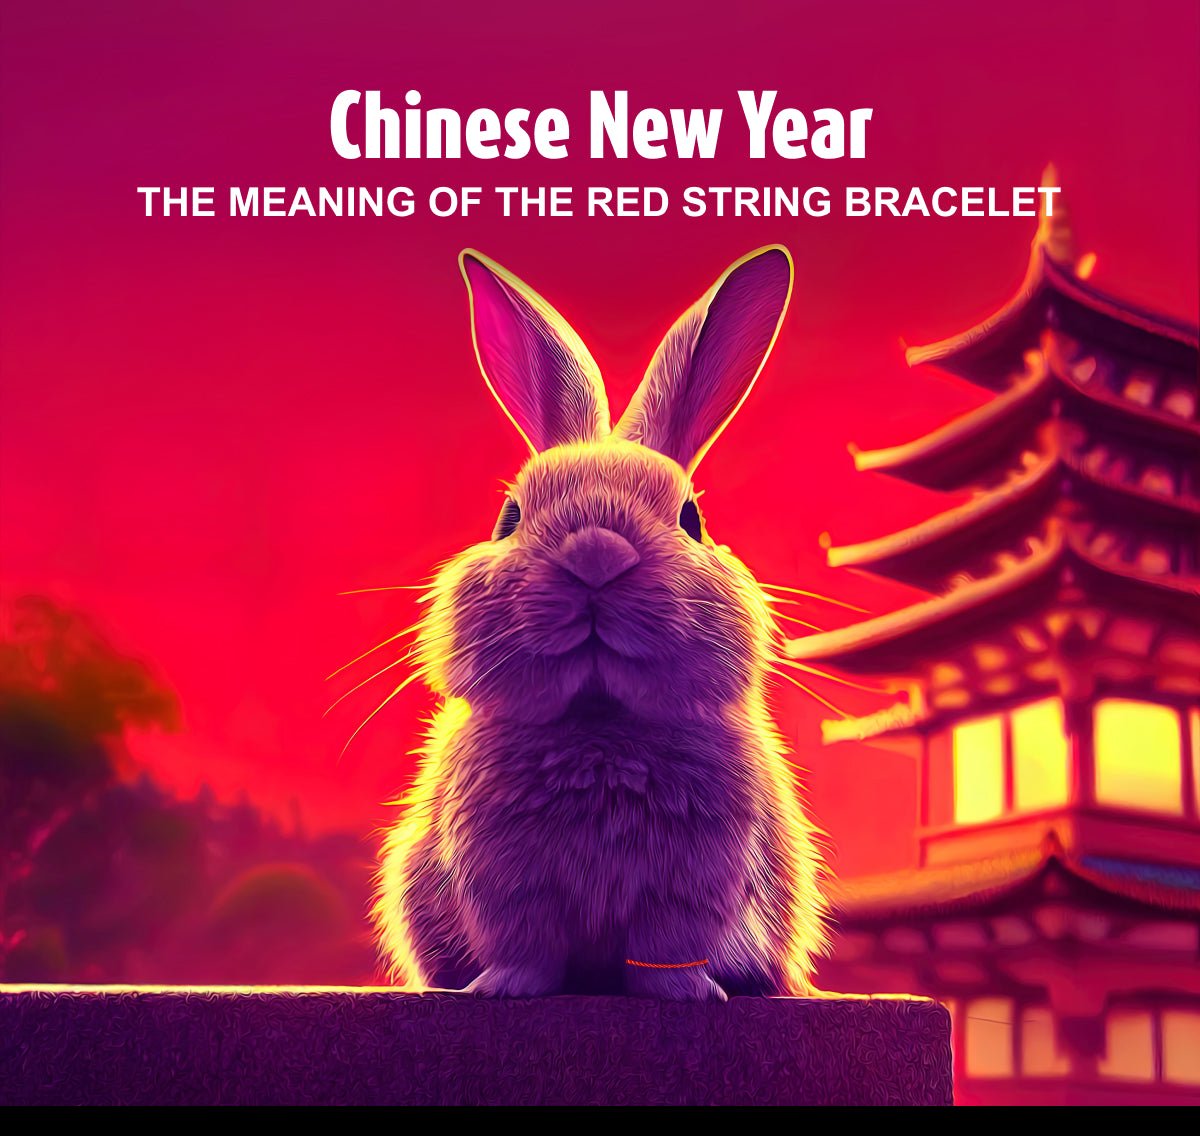 Red String Bracelets For Chinese New Year - Alef Bet by Paula